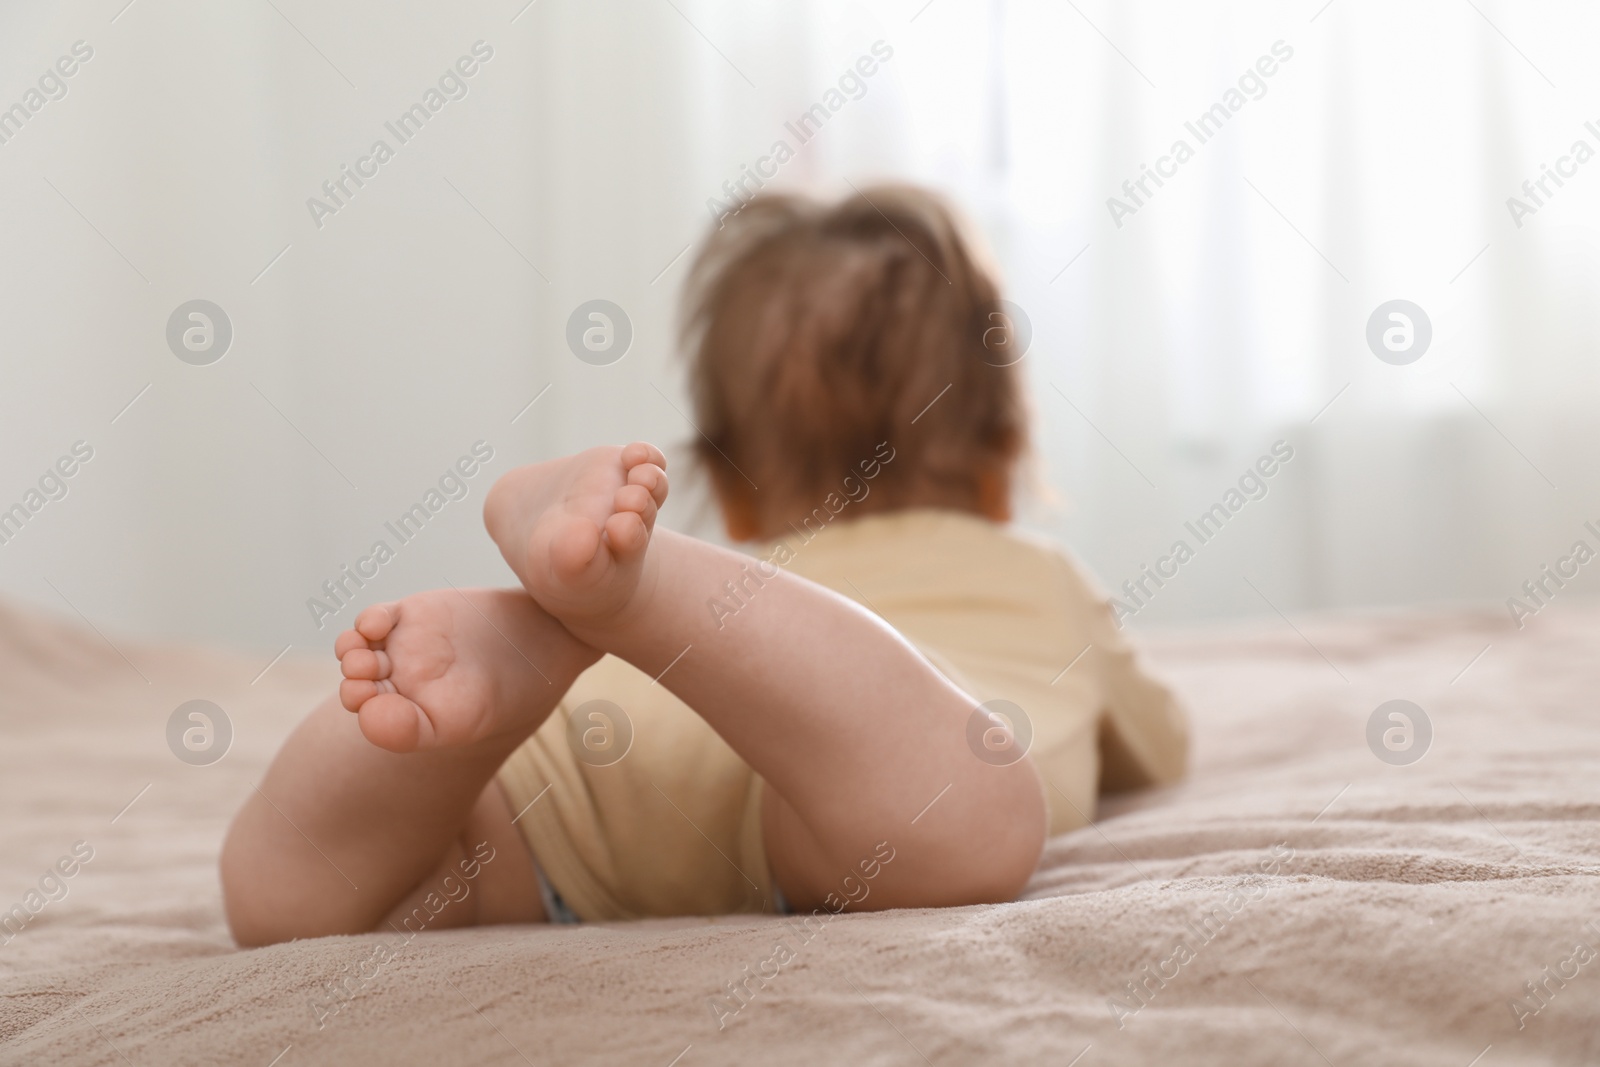 Photo of Little baby lying on bed indoors, focus on legs